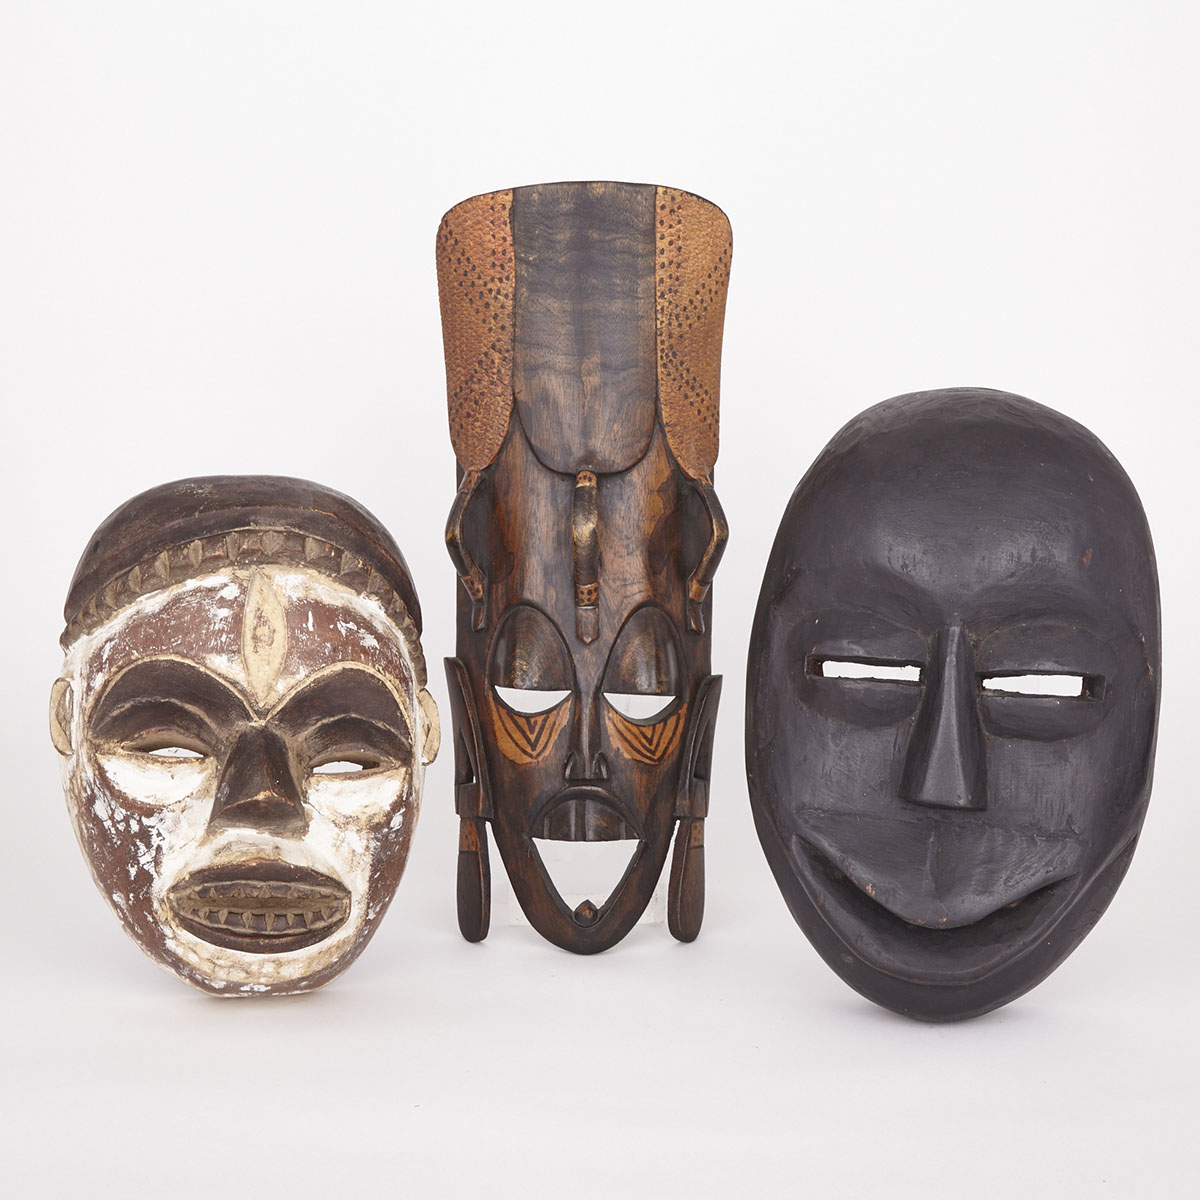 Two Carved and Painted Wood Masks together with a Carved and Stained Wood Mask, Africa, 20th/21st century